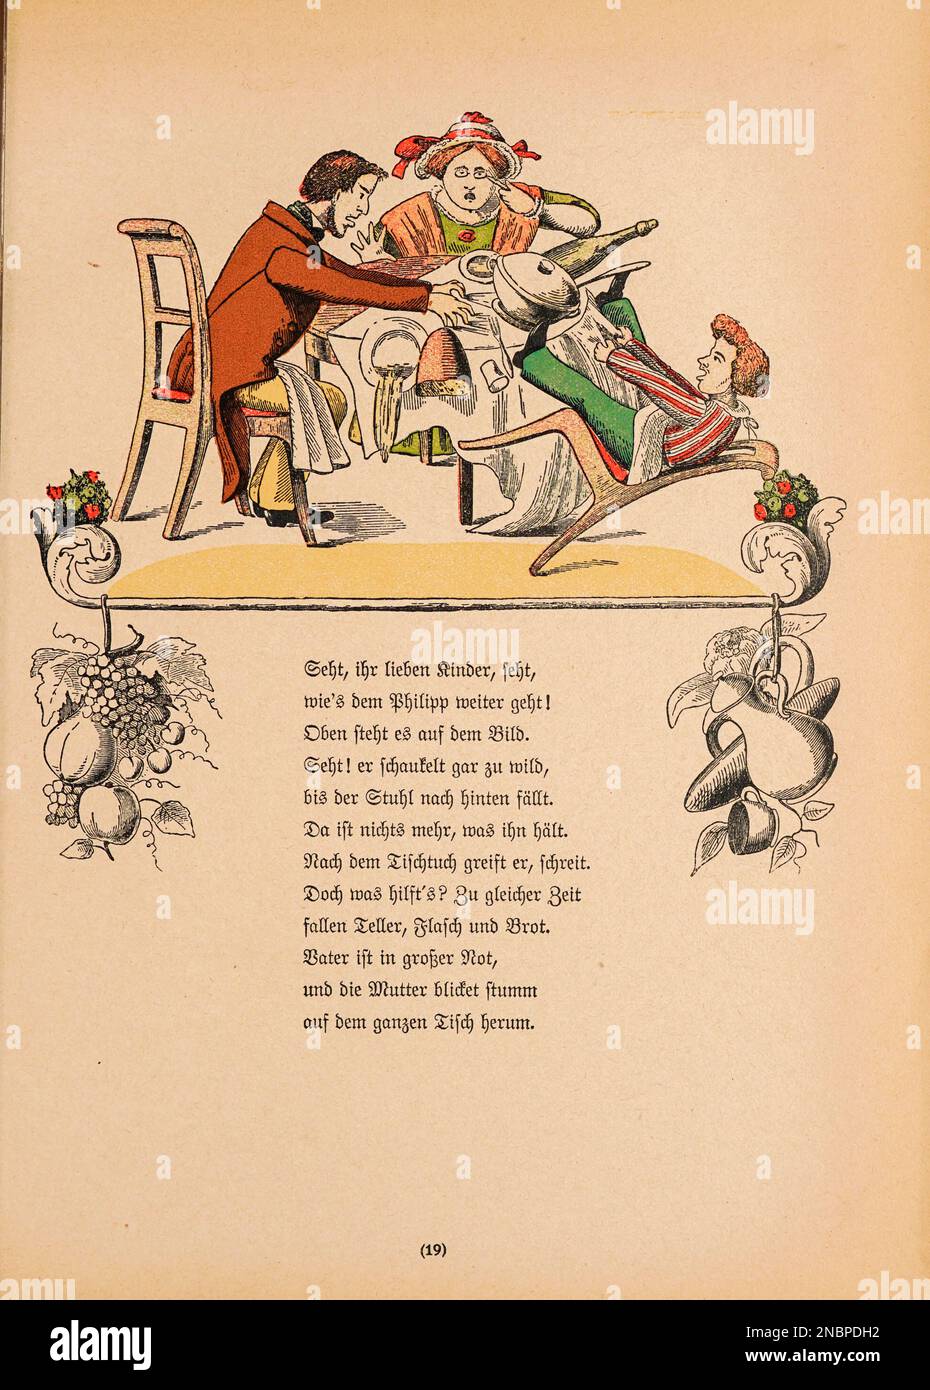 Die Geschichte vom Zappel philipp - The story of fidgety philipp from the original German Version of the book ' Das Struwwelpeter-album : aus Bilderbüchern ' by Hoffmann, Heinrich, 1809-1894 Publication date 1900 Publisher Frankfurt am Main : Rütten & Loening [ Der Struwwelpeter ('shock-headed Peter' or 'Shaggy Peter') is an 1845 German children's book by Heinrich Hoffmann. It comprises ten illustrated and rhymed stories, mostly about children. Each has a clear moral that demonstrates the disastrous consequences of misbehavior in an exaggerated way.[1] The title of the first story provides the Stock Photo